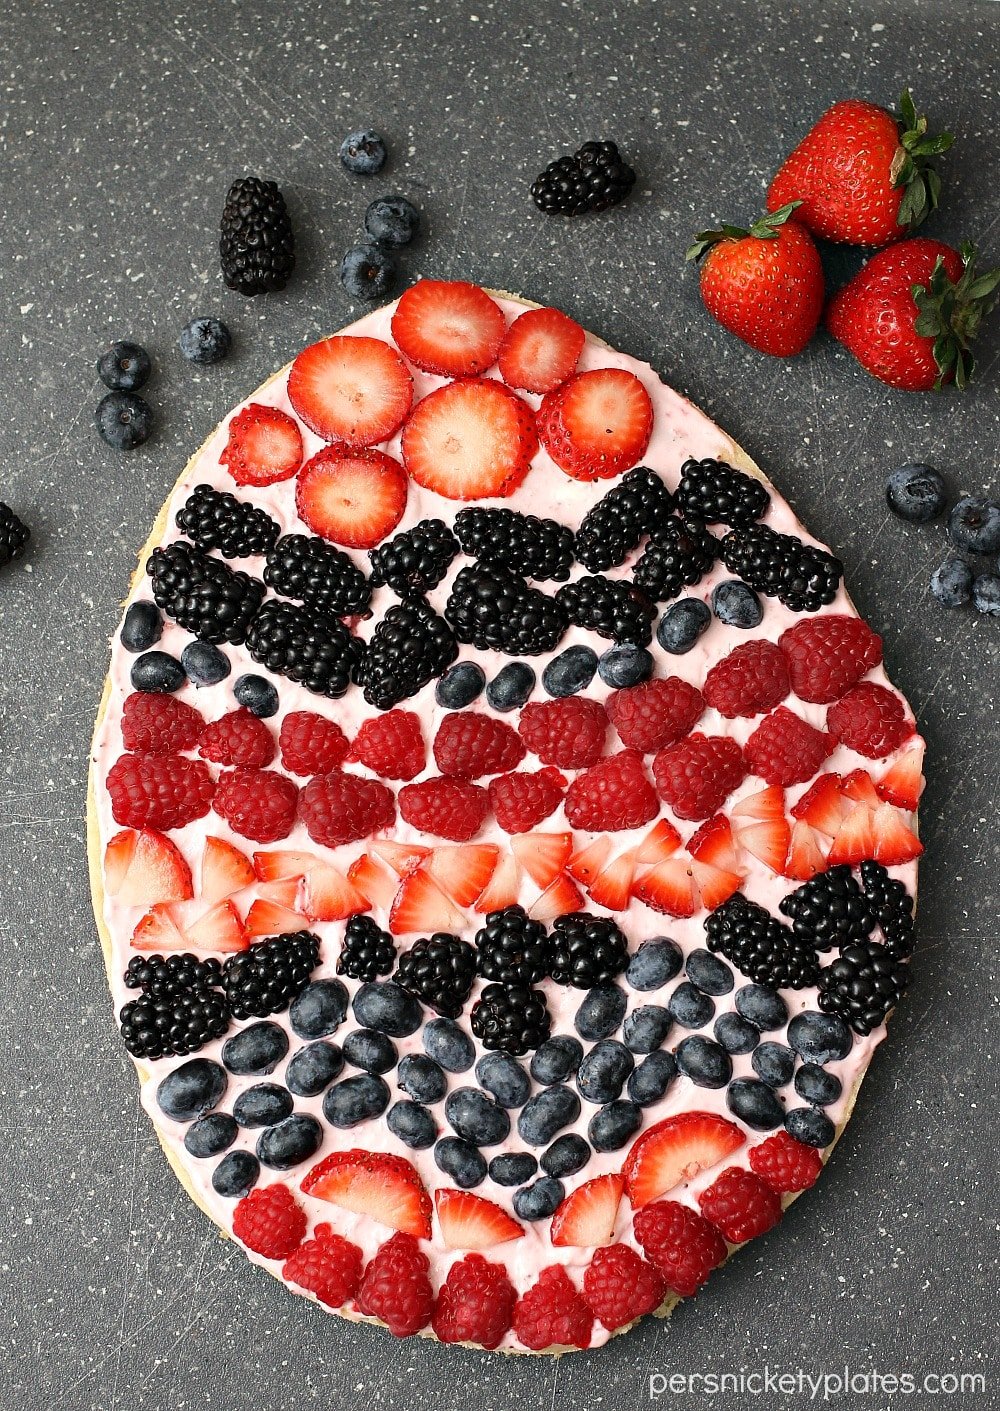 A sugar cookie base with a strawberry cream cheese frosting topped with fresh berries makes the perfect Easter Egg Fruit Pizza. Fun to decorate with the kids! | www.persnicketyplates.com